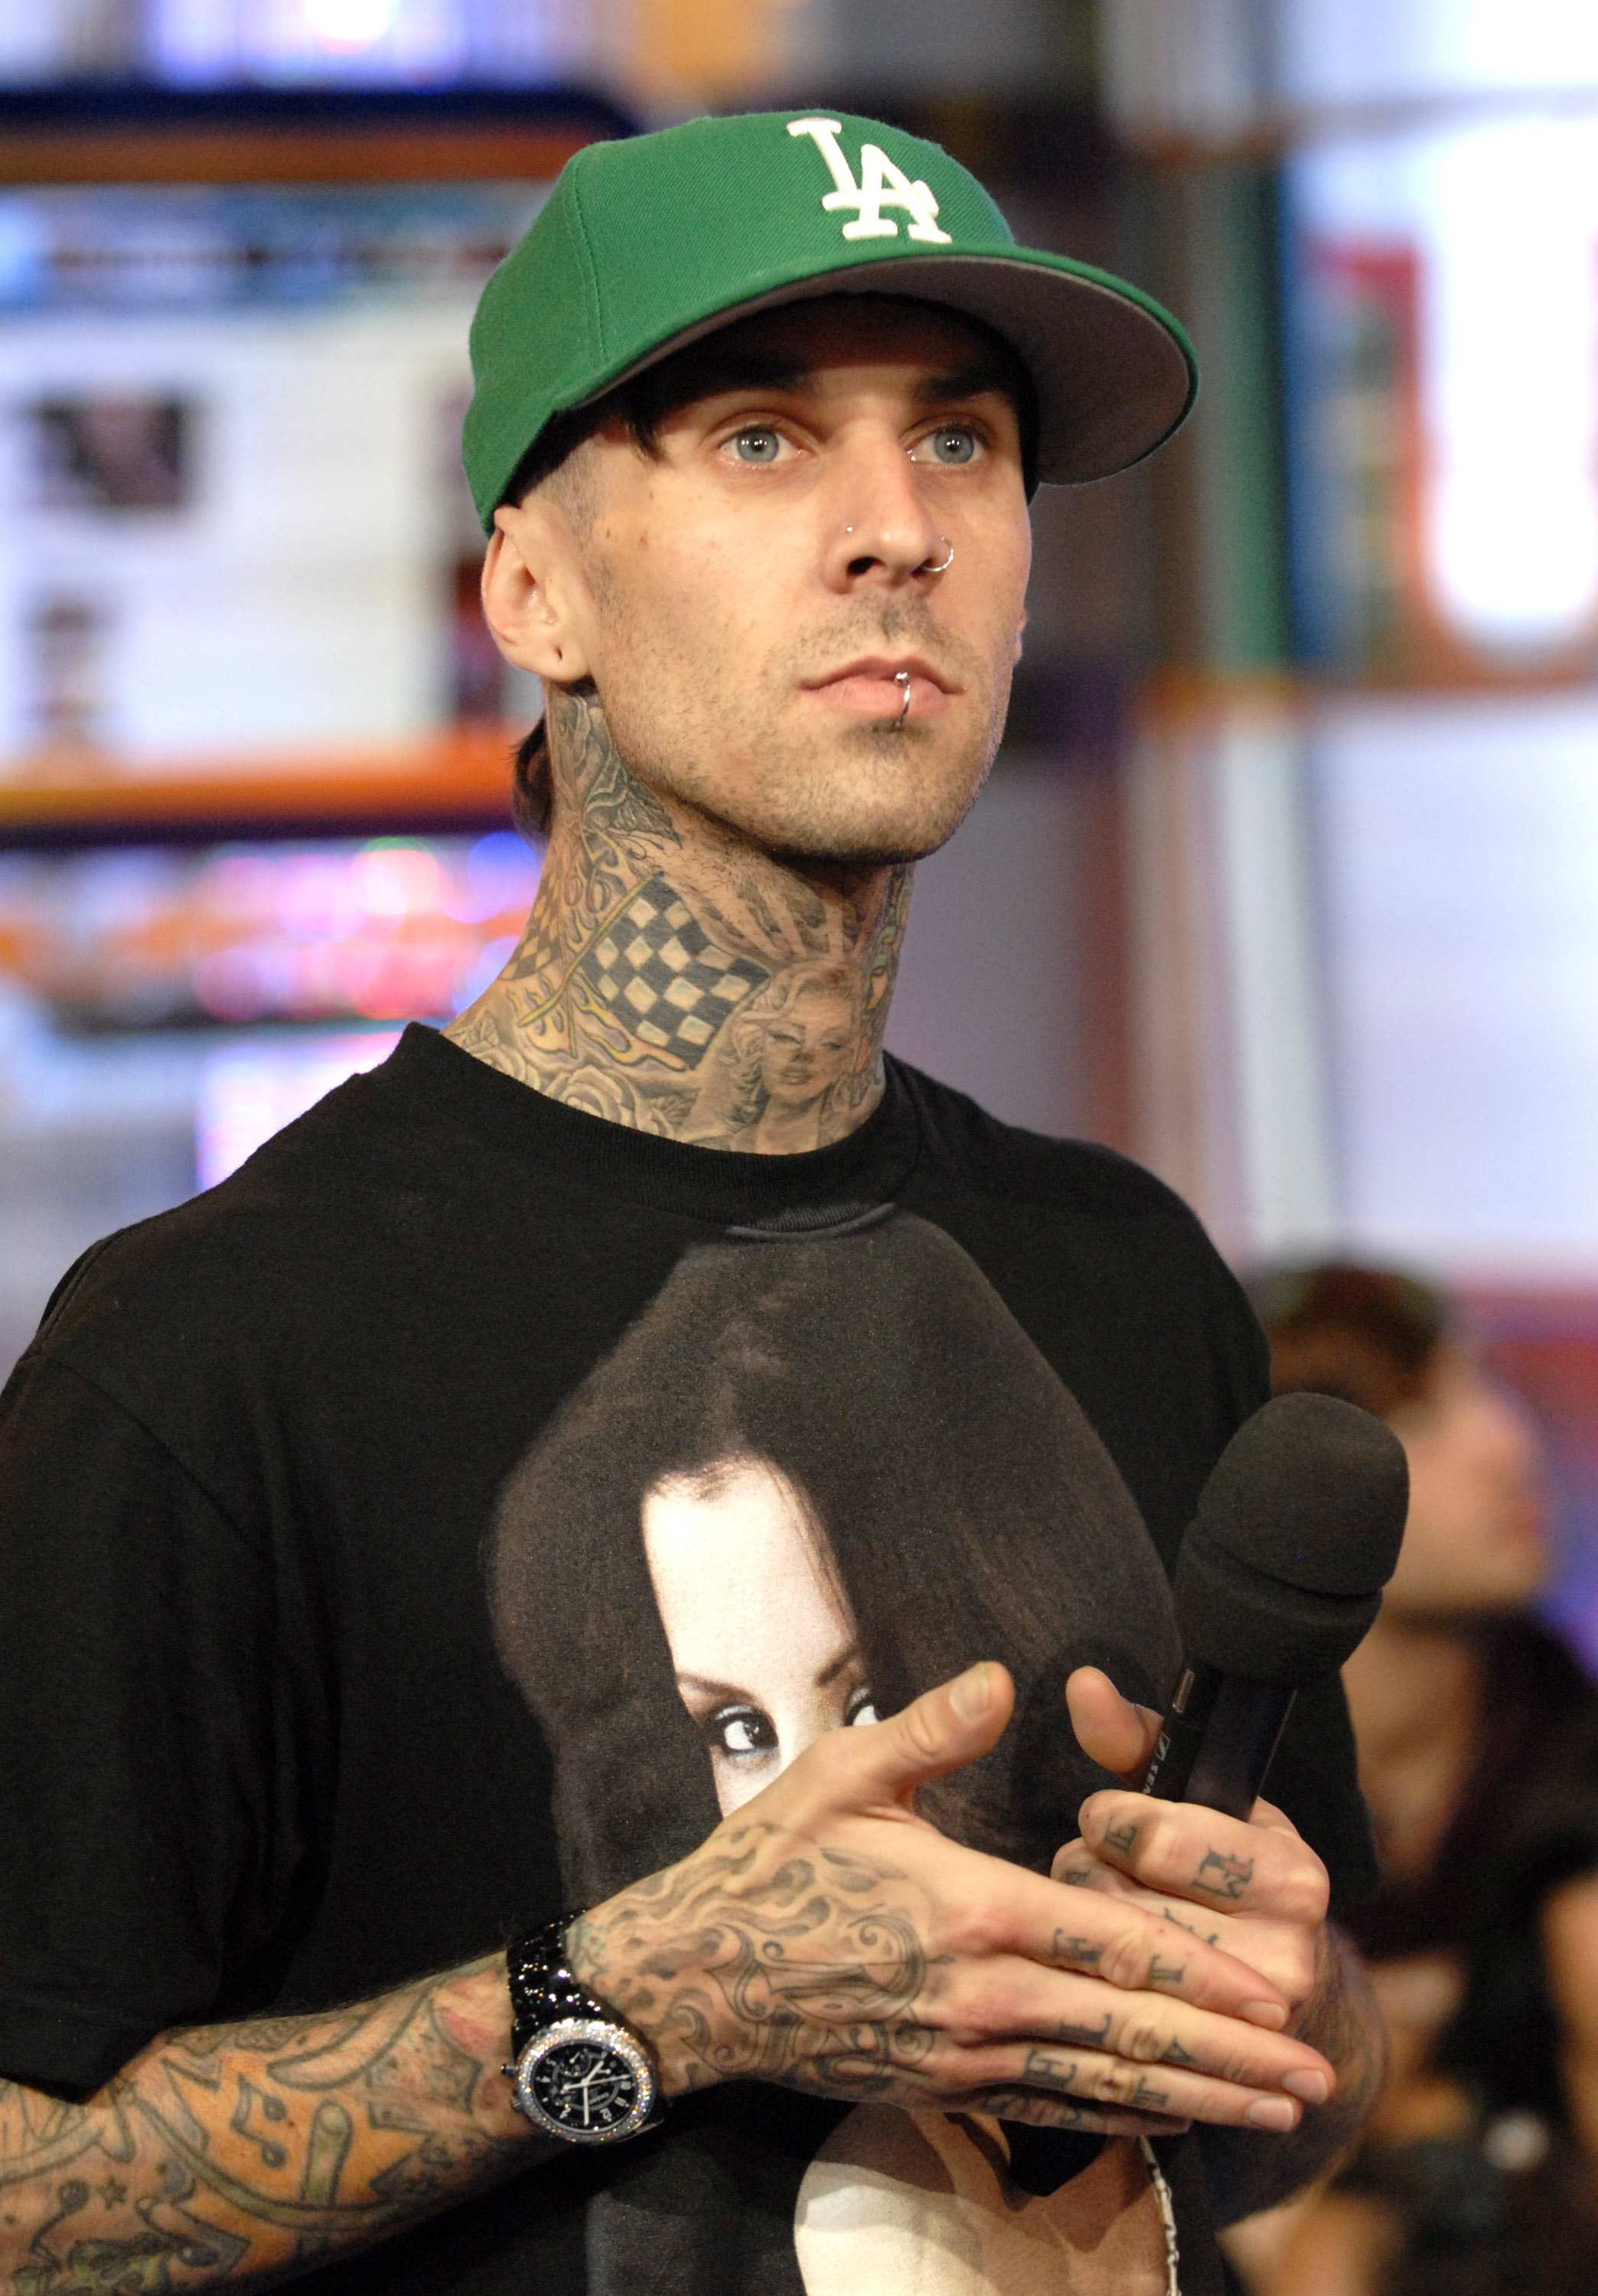 Close-up of Travis holding a microphone and wearing a cap